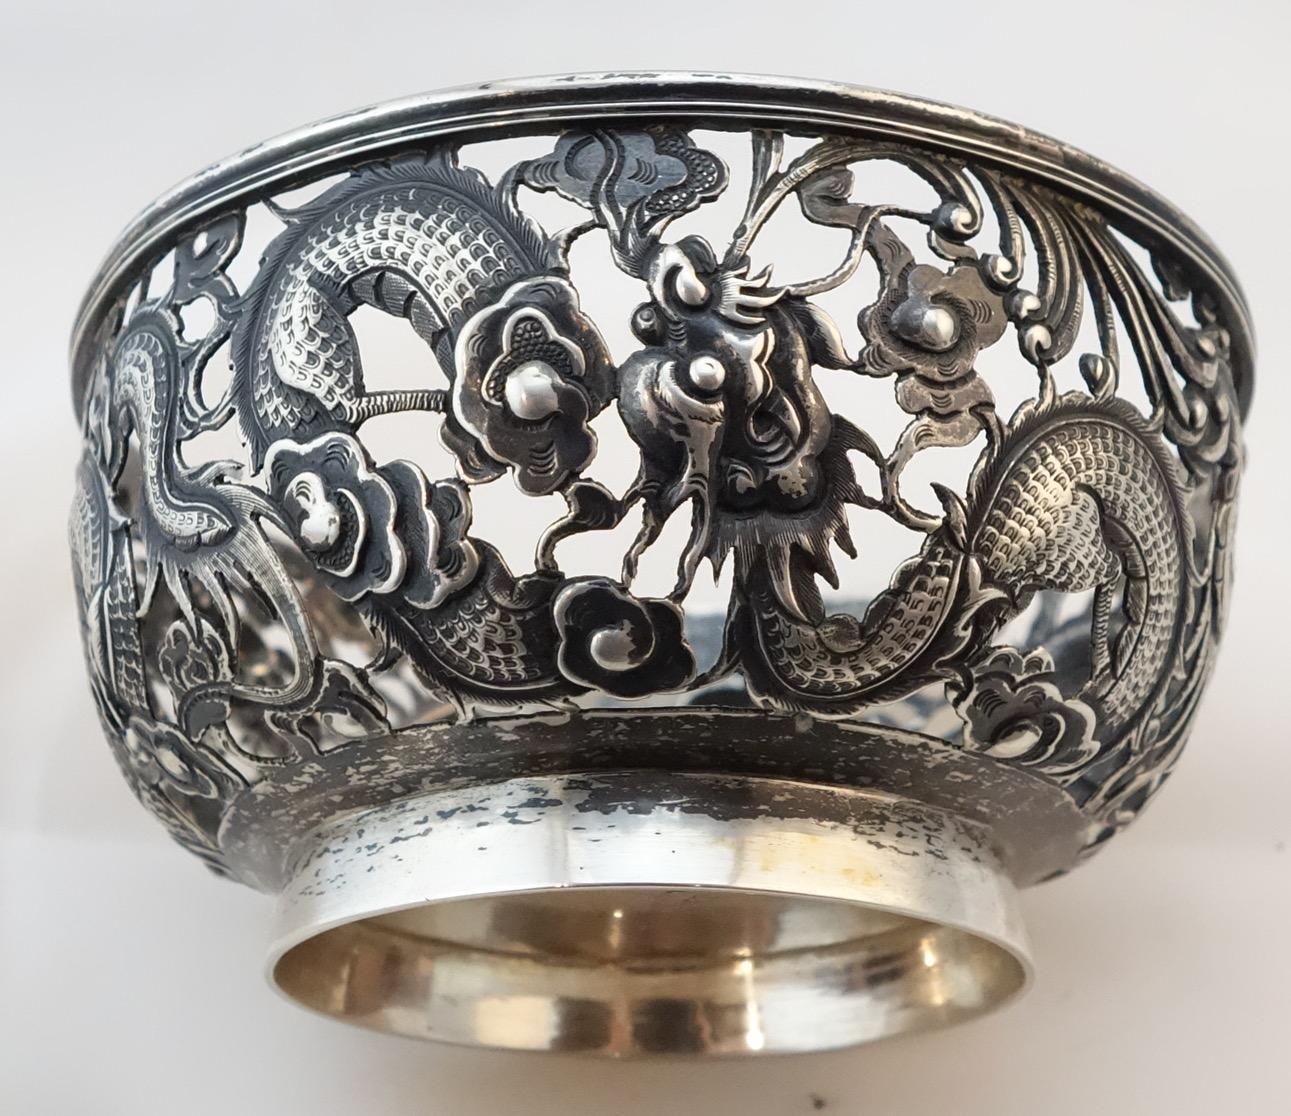 Chinese silver repousse and openwork bowl, decorated with dragons and flaming pearl. The bowl is marked on the bottom with a Chinese character, 